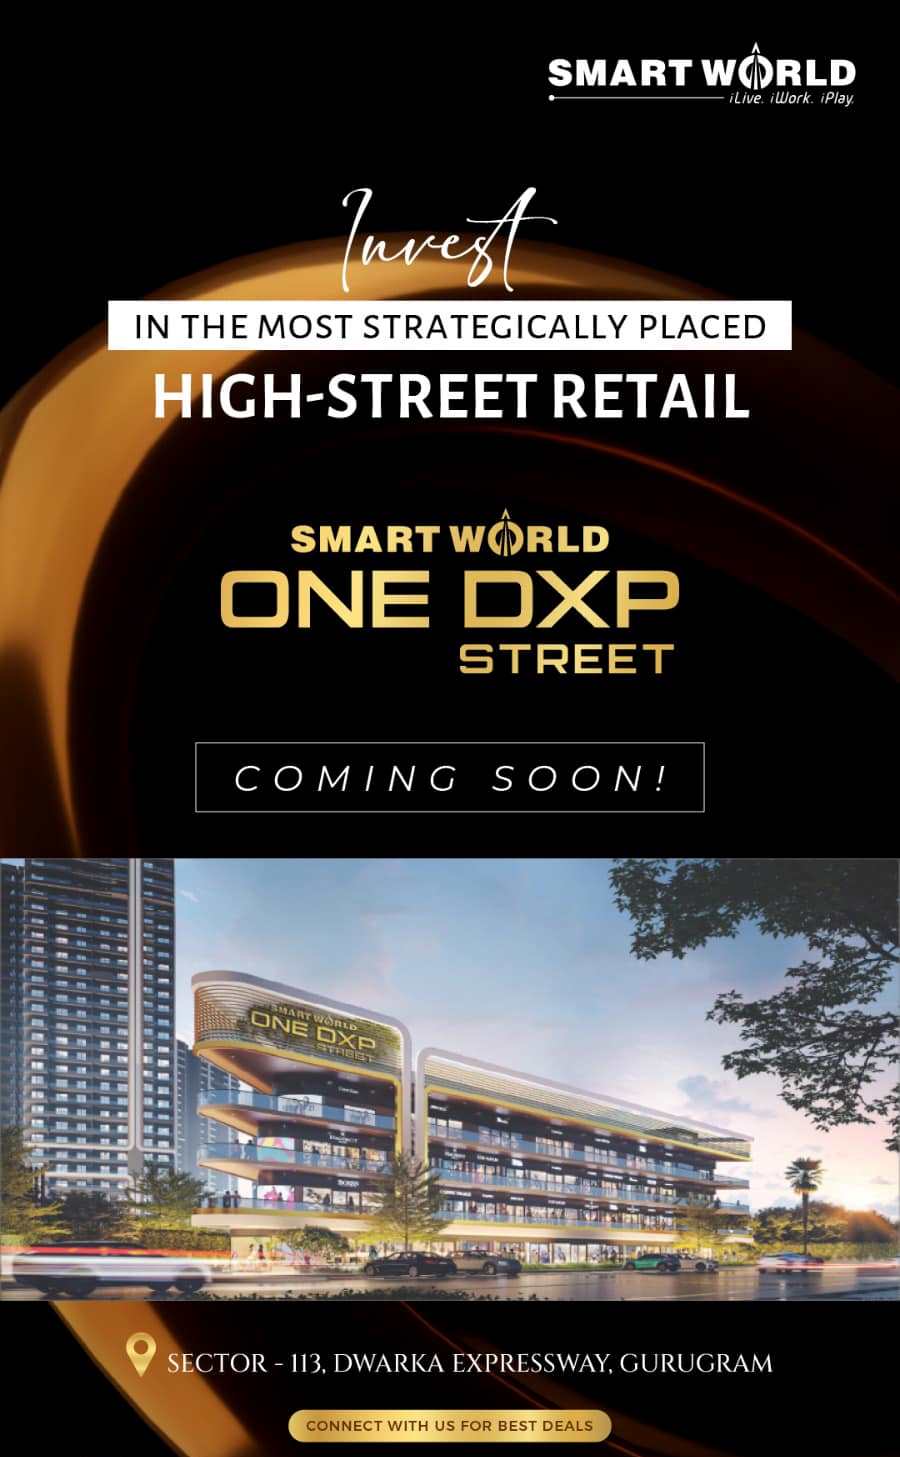 Coming soon at Smart World One Dxp Street in Sector 113, Gurgaon